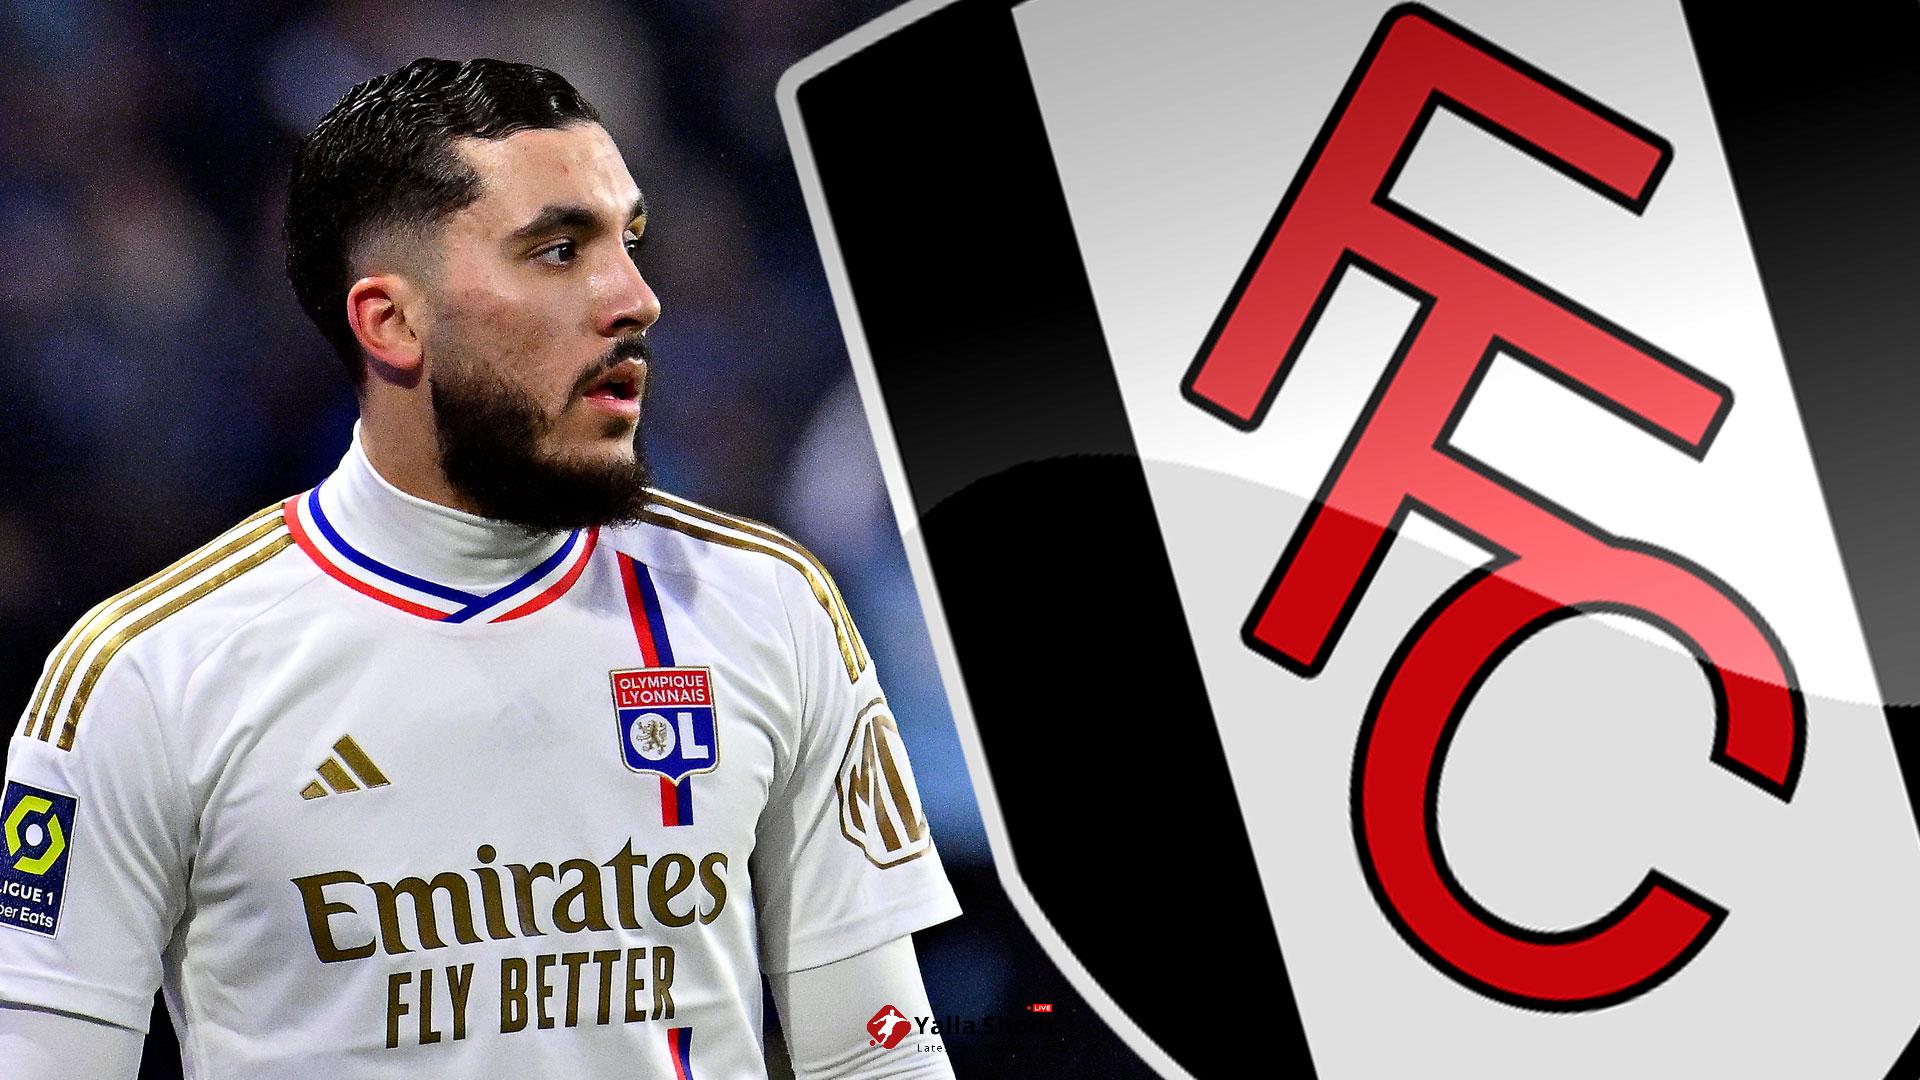 Fulham line up summer transfer move for Lyon star Rayan Cherki after failing with £35m bid in January